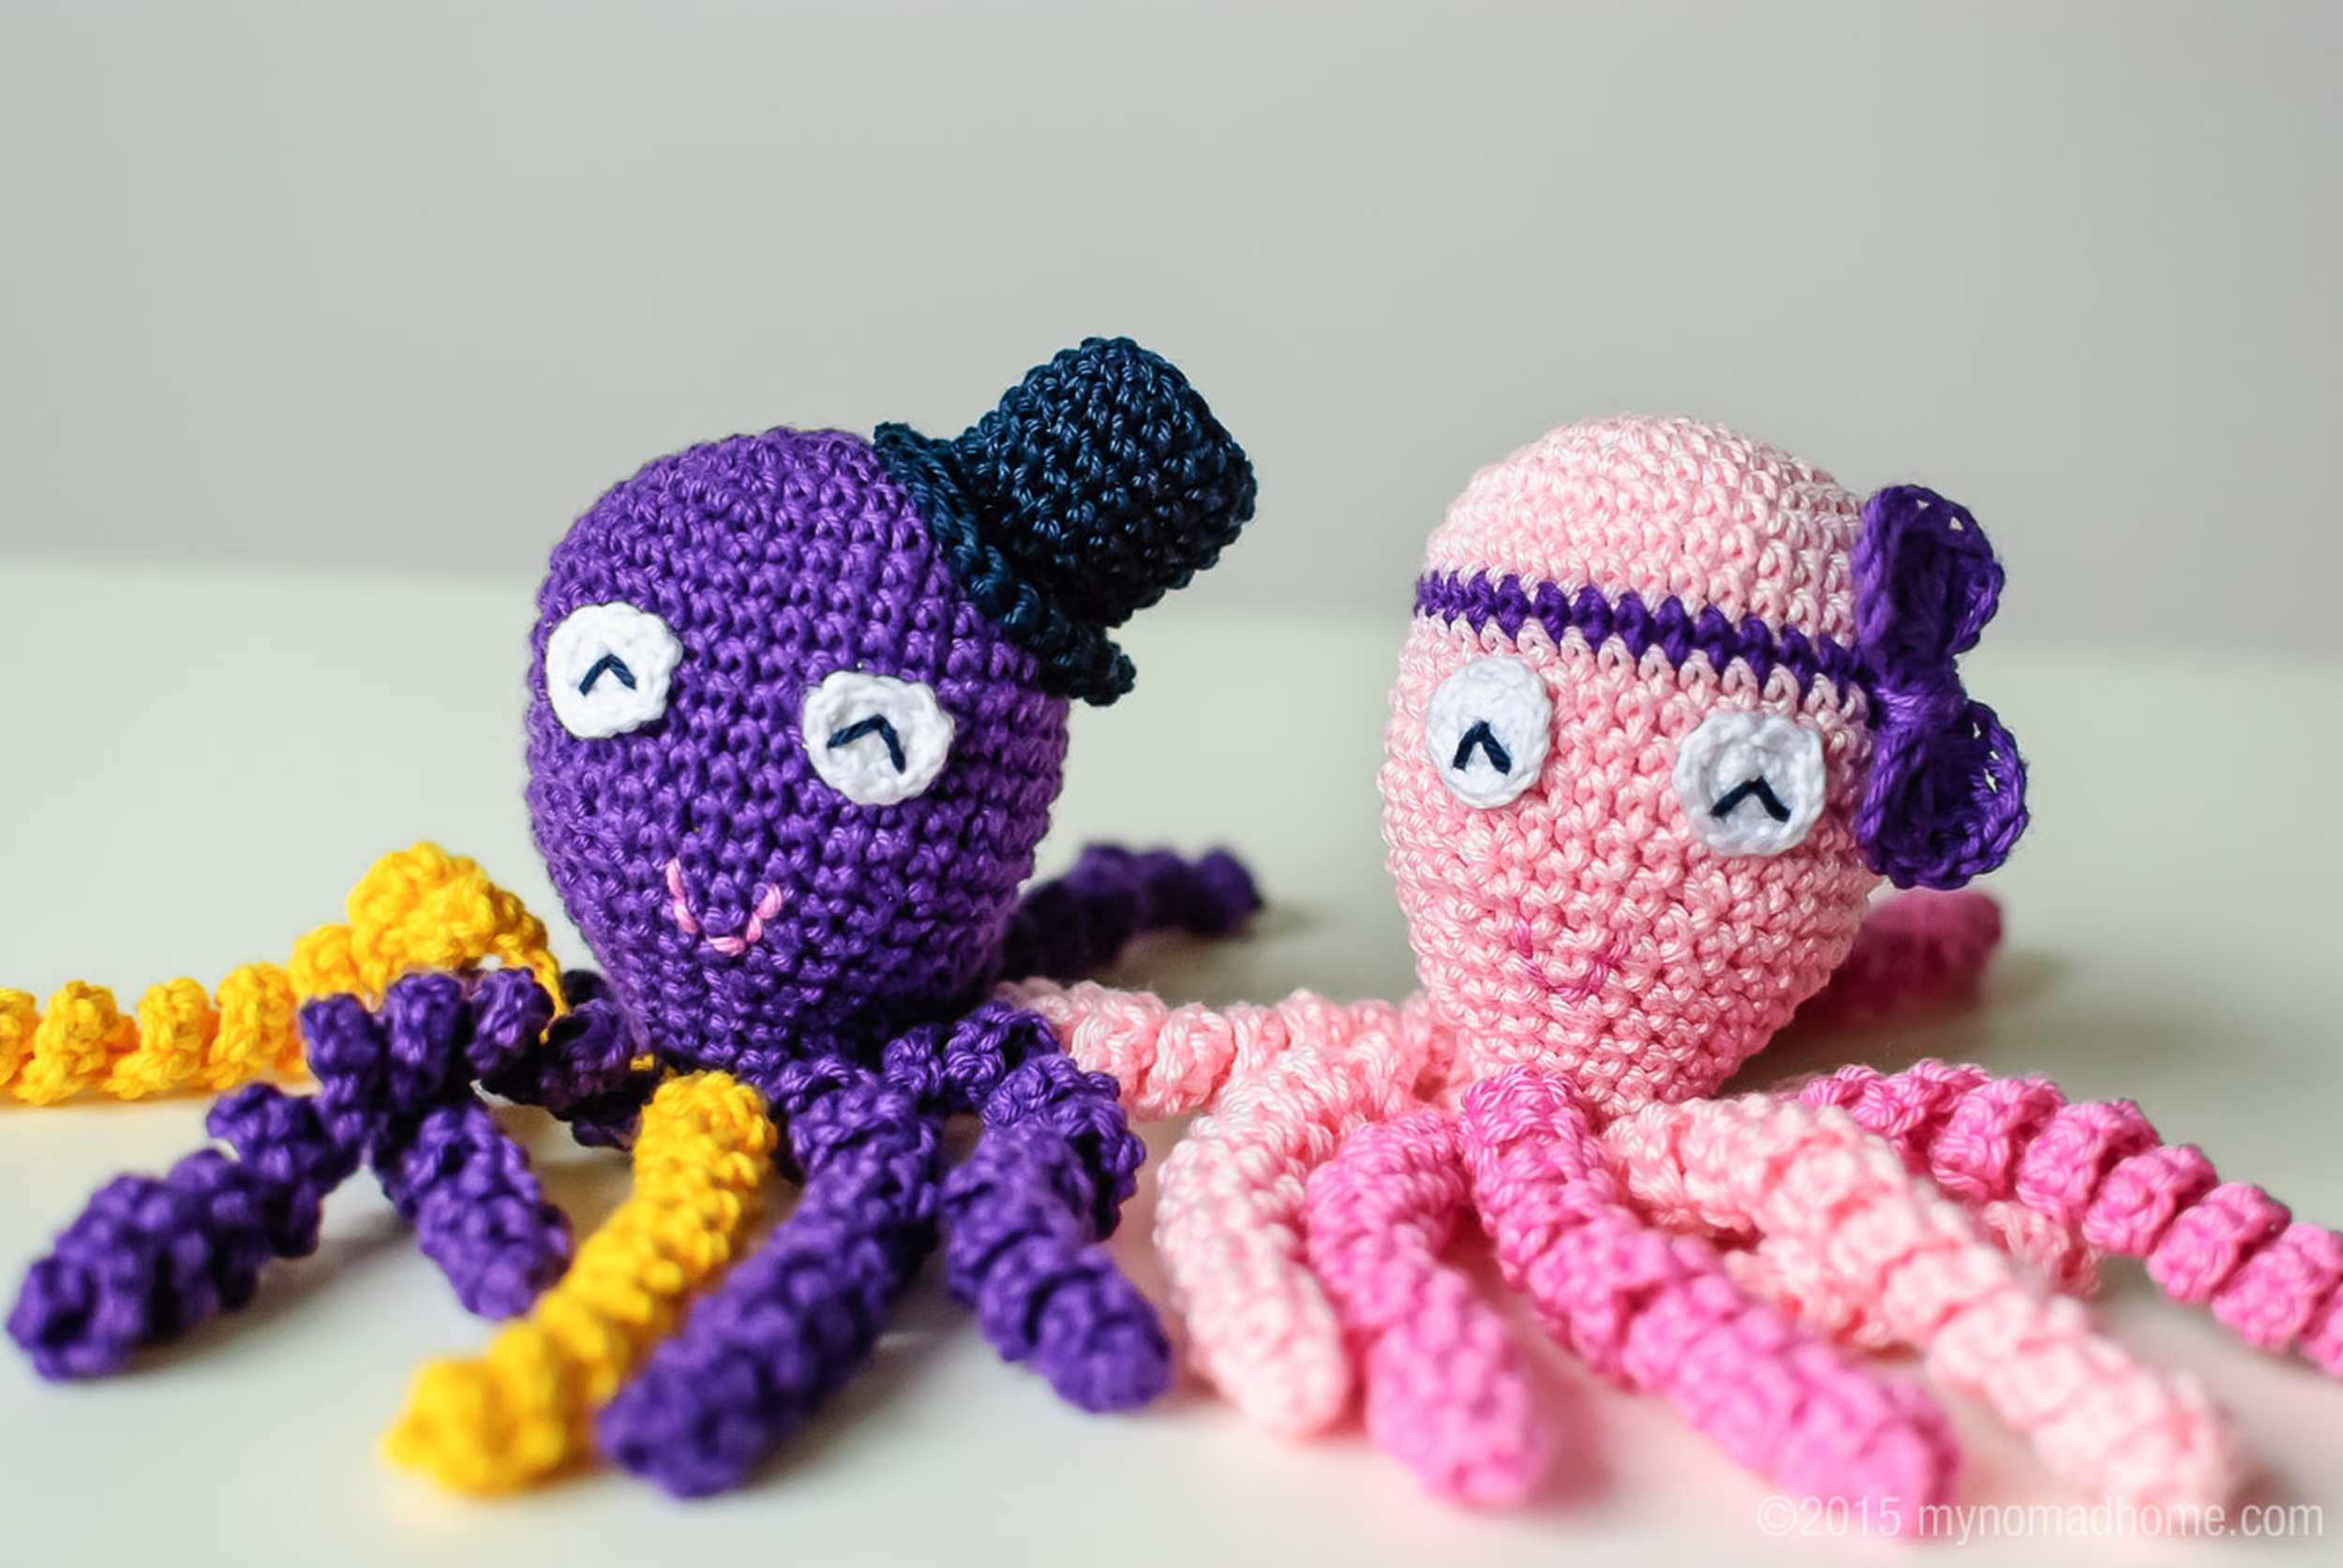 octopus-for-a-preemie-4231